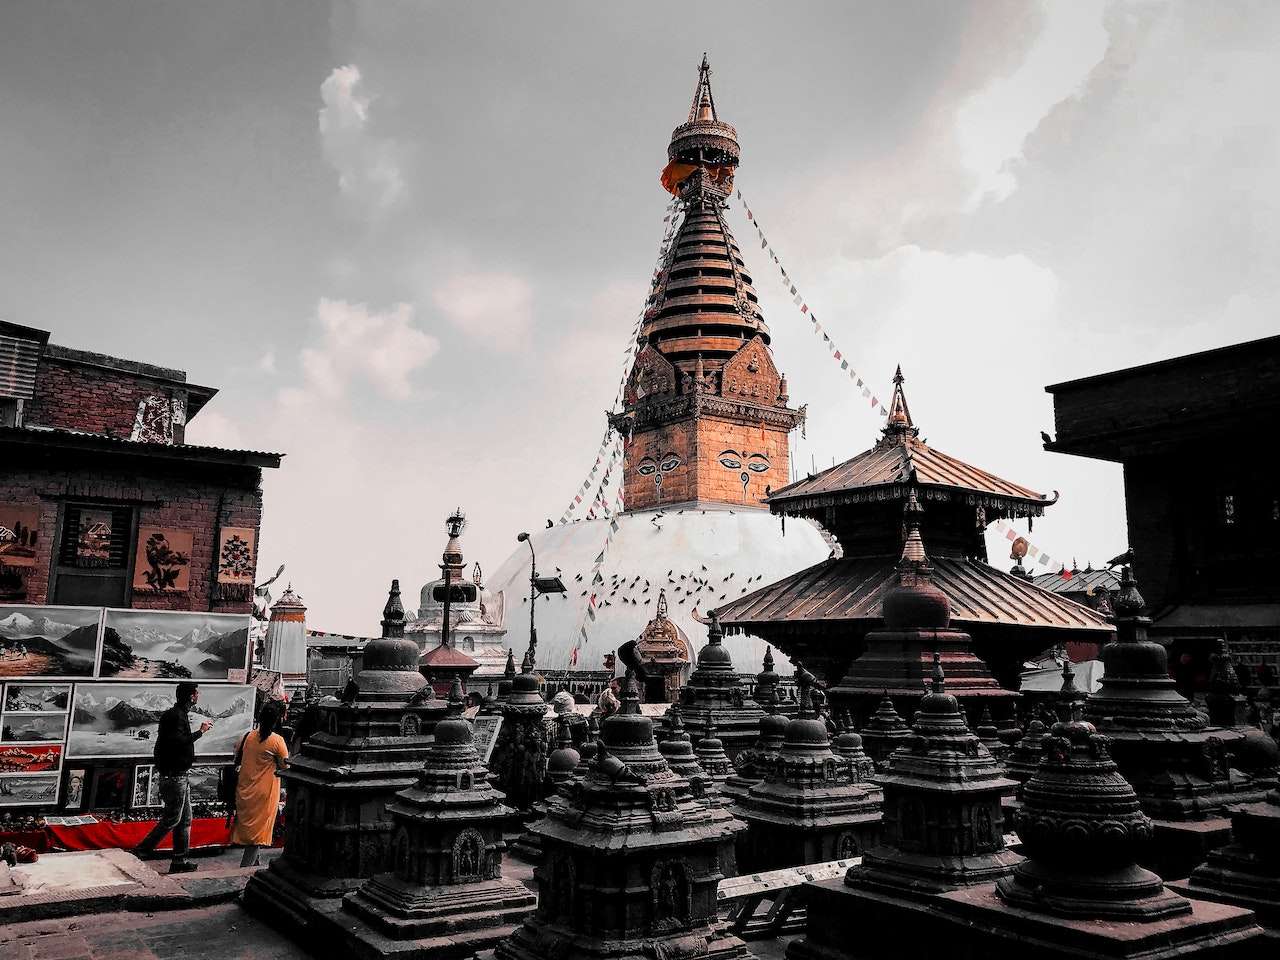 Nepal is a breathtaking country that is rich in culture, history, and natural beauty. With its towering Himalayan peaks, rolling hills, and vibrant cities, Nepal is a must-visit destination for travelers looking to experience the best of South Asia.